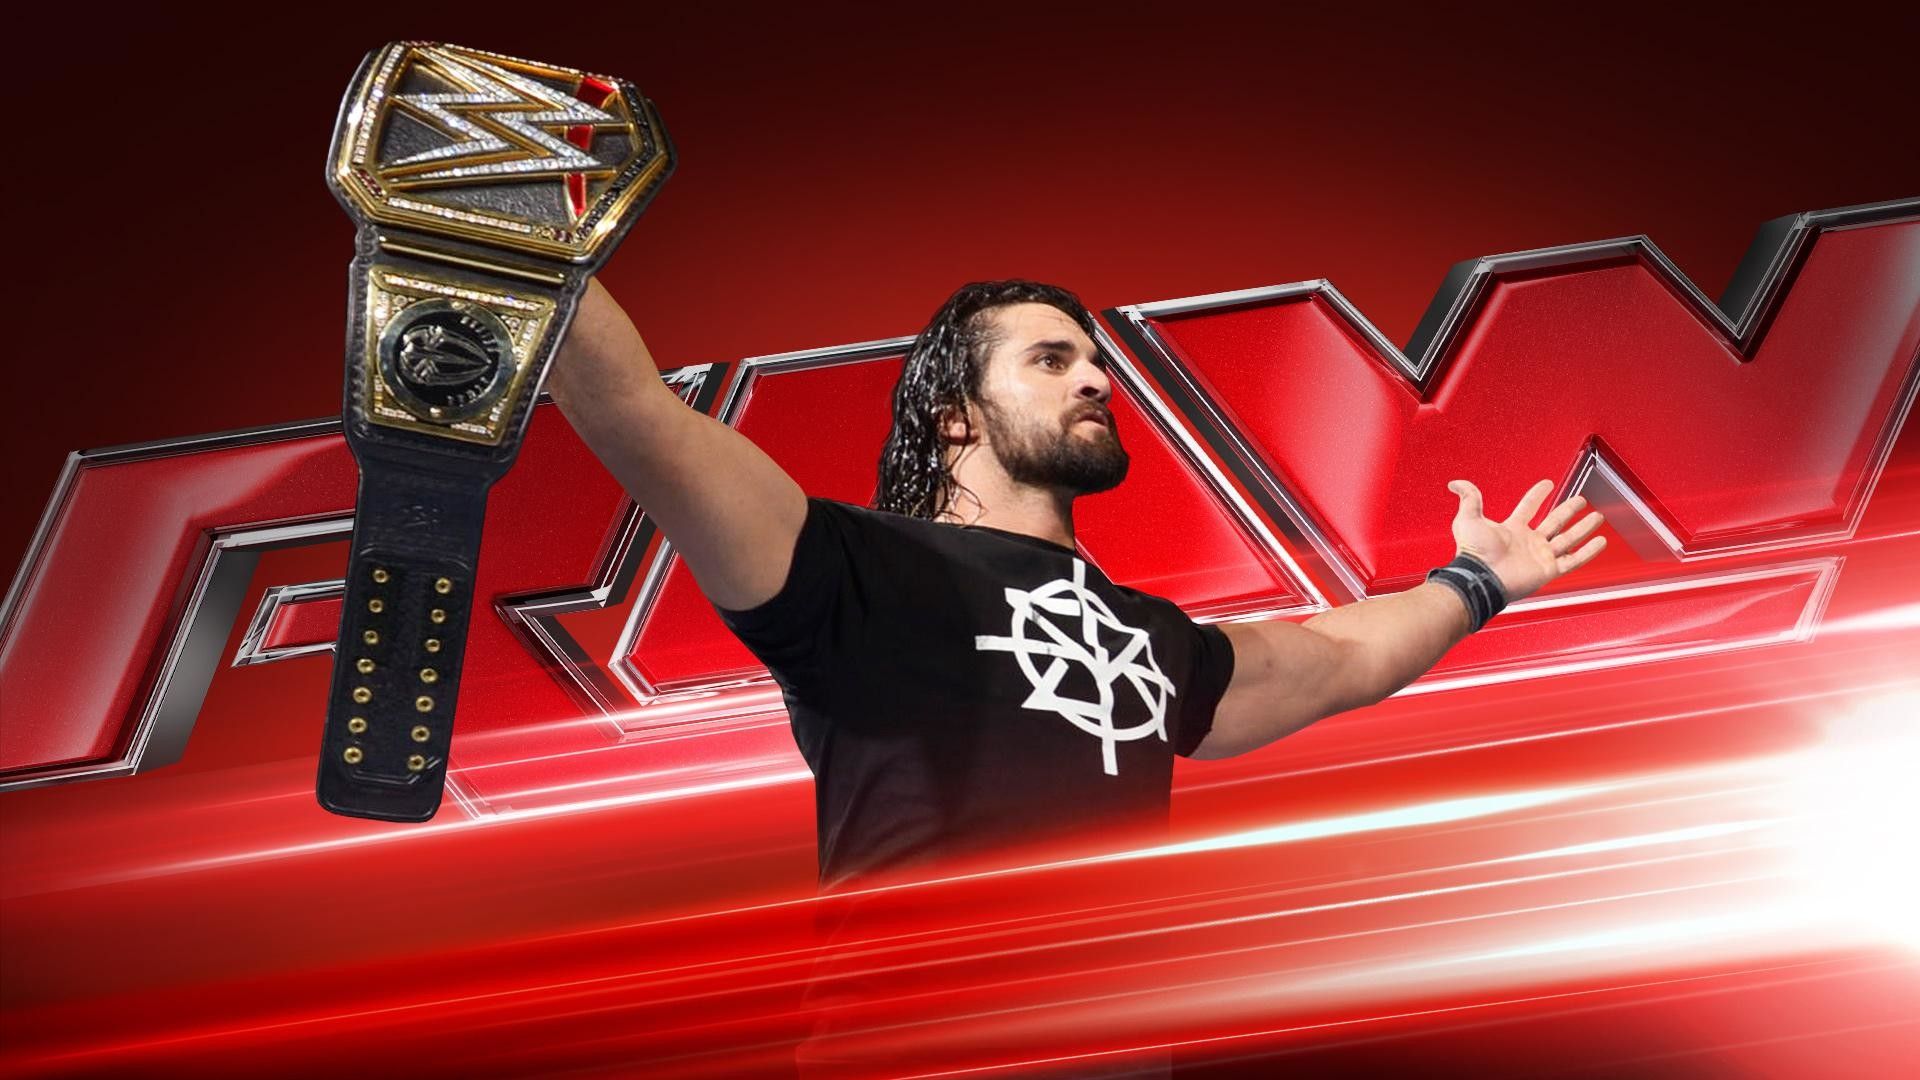 1920x Wwe Monday Night Raw Preview For Universal Championship Belt Seth Rollins